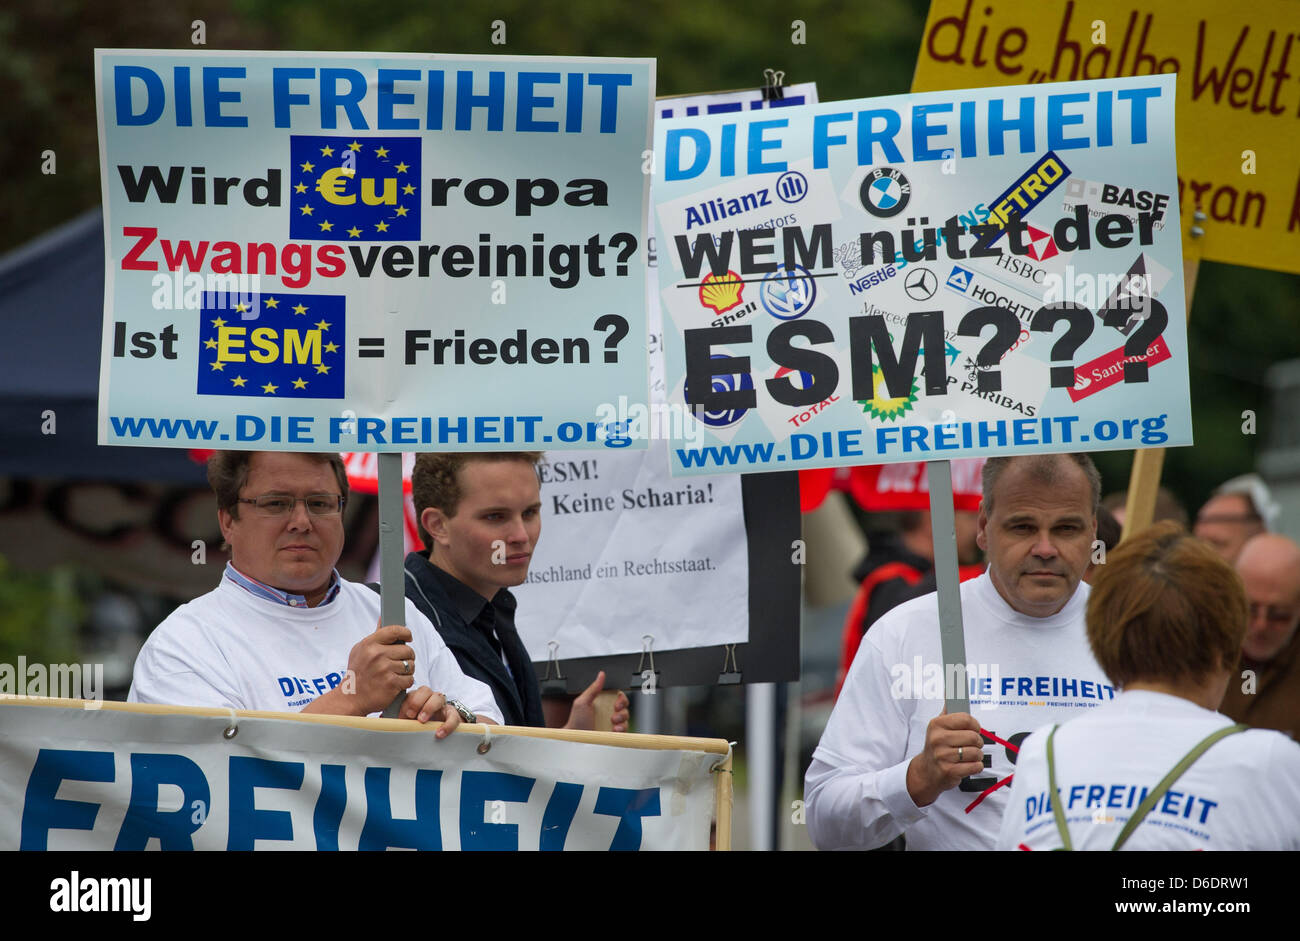 Protesters demonstrate in front of the Federal Constitutional Court of Germany (BVerfG) after the announcement of the verdict on on the permanent European Stability Mechanism and the European fiscal pact in Karslruhe, Germany, 12 September 2012. The BVerfG ruled Germany's participation in the ESM constitutional, if Germany's liability would be limited to the agrred upon 190 billion Stock Photo